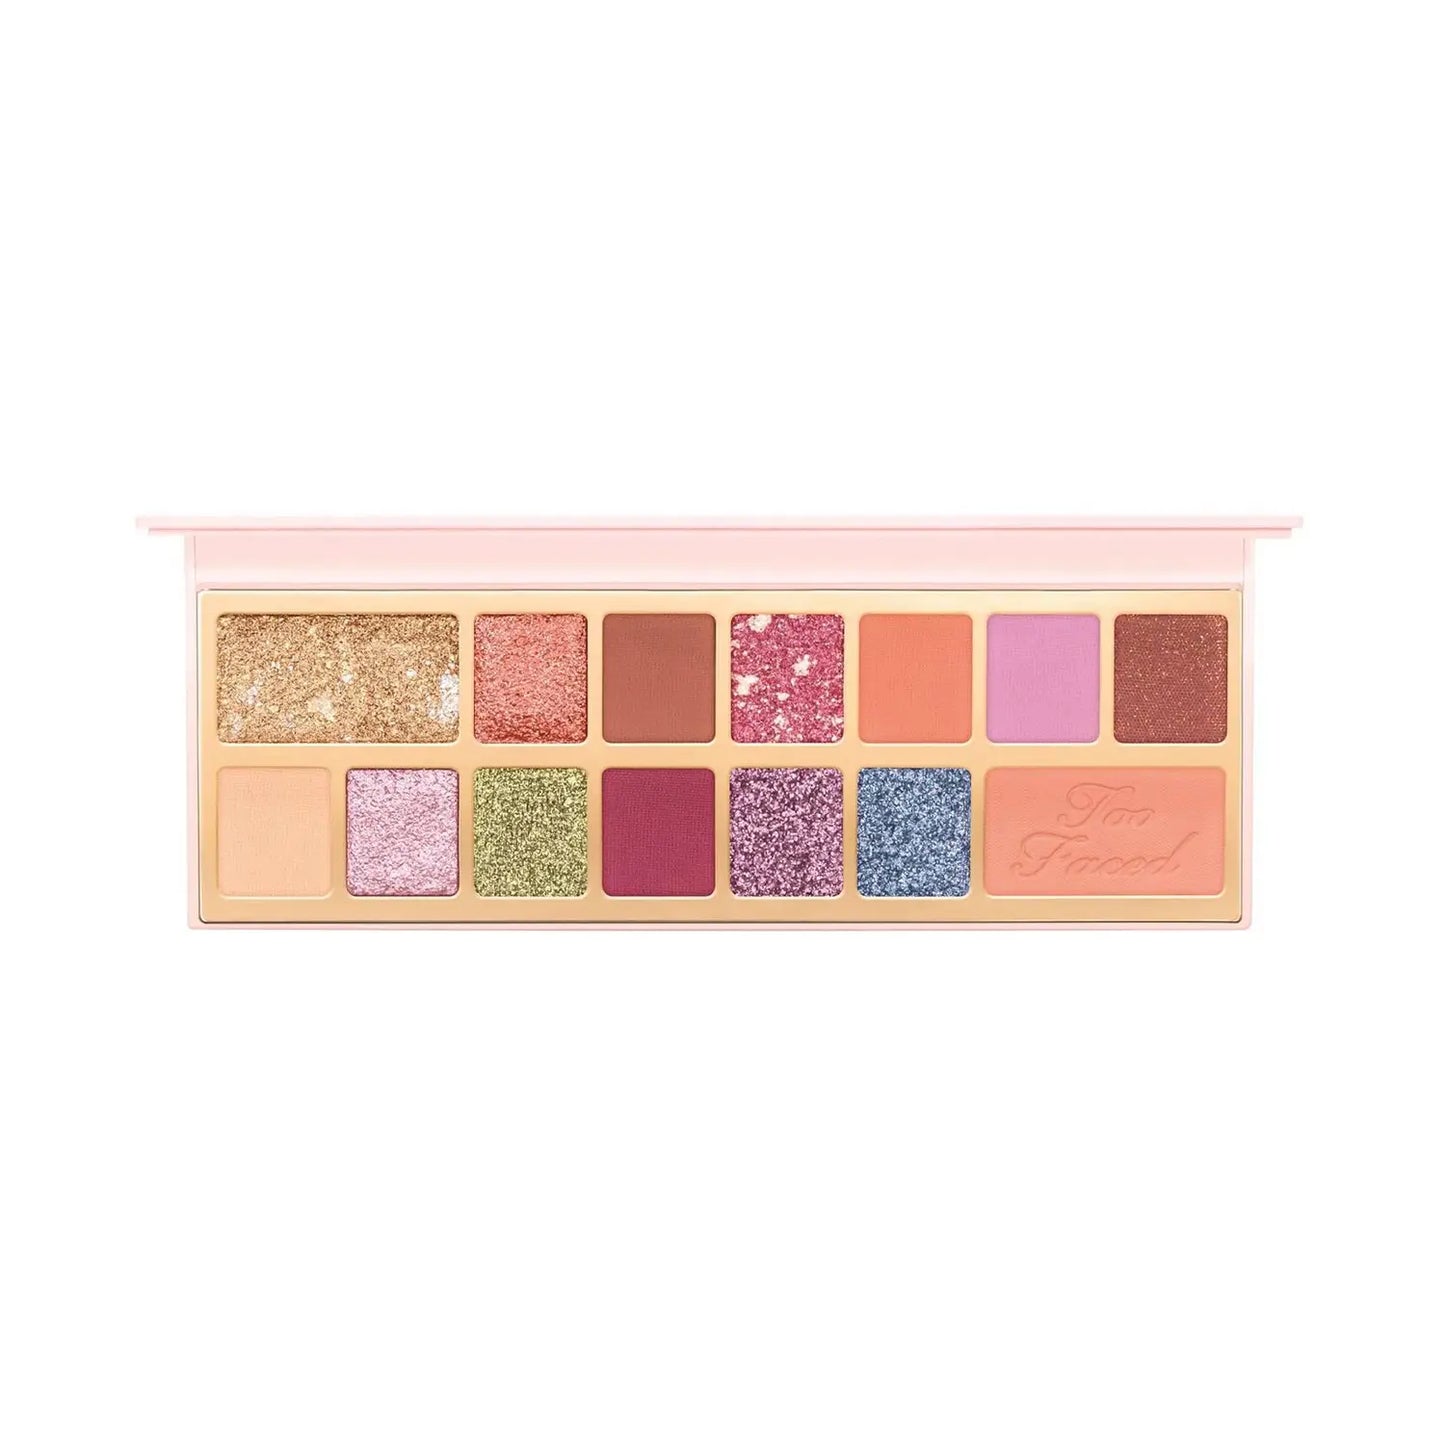 Too Faced Eye Shadow Palette - Pinker Times Ahead